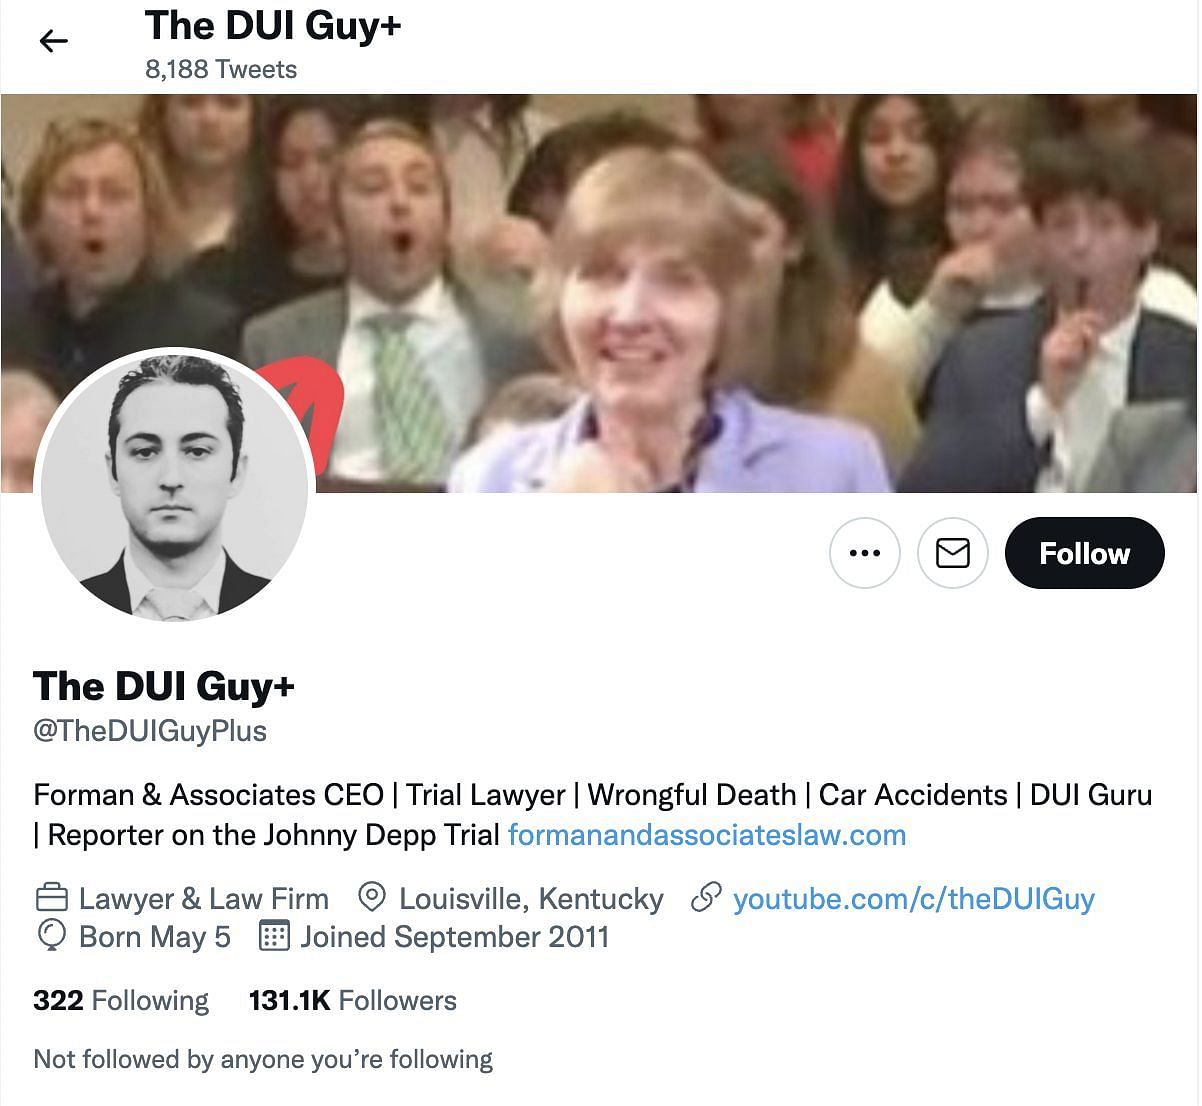 Larry Forman&#039;s Twitter handle where he posted details about the trial (screenshot via @TheDUIGuyPlus/Twitter) Notes from the trial taken by Larry Forman (Image via @TheDUIGuyPlus/Twitter)